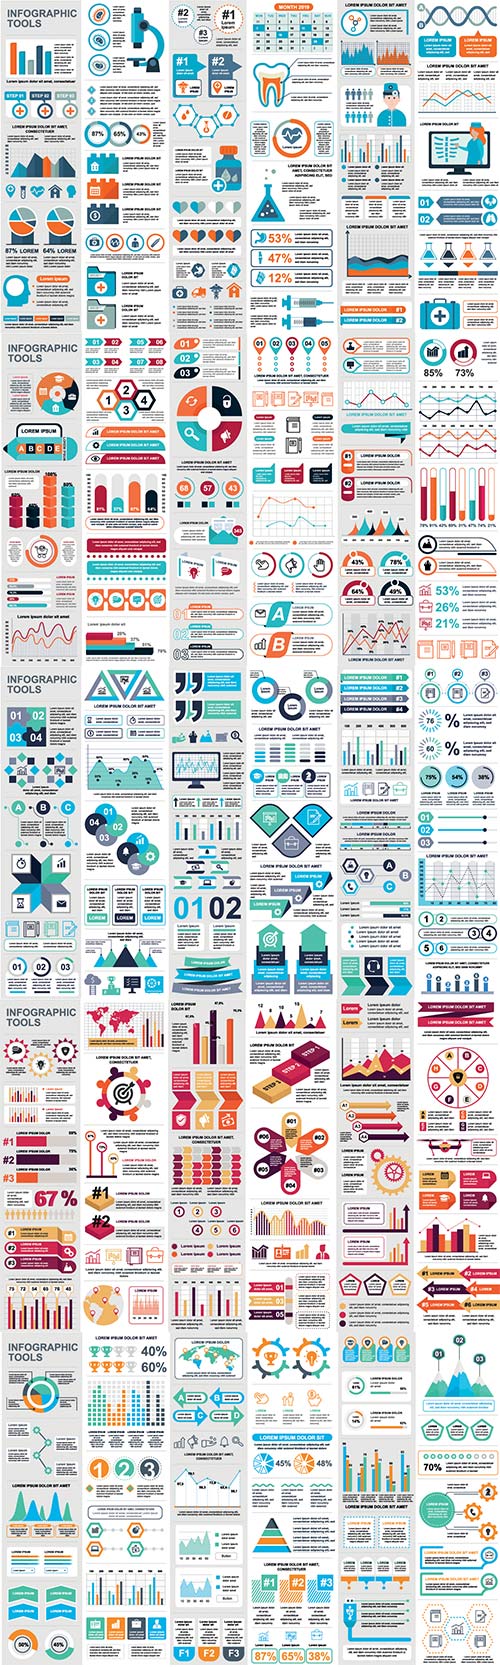 Infographic elements data visualization vector # 4